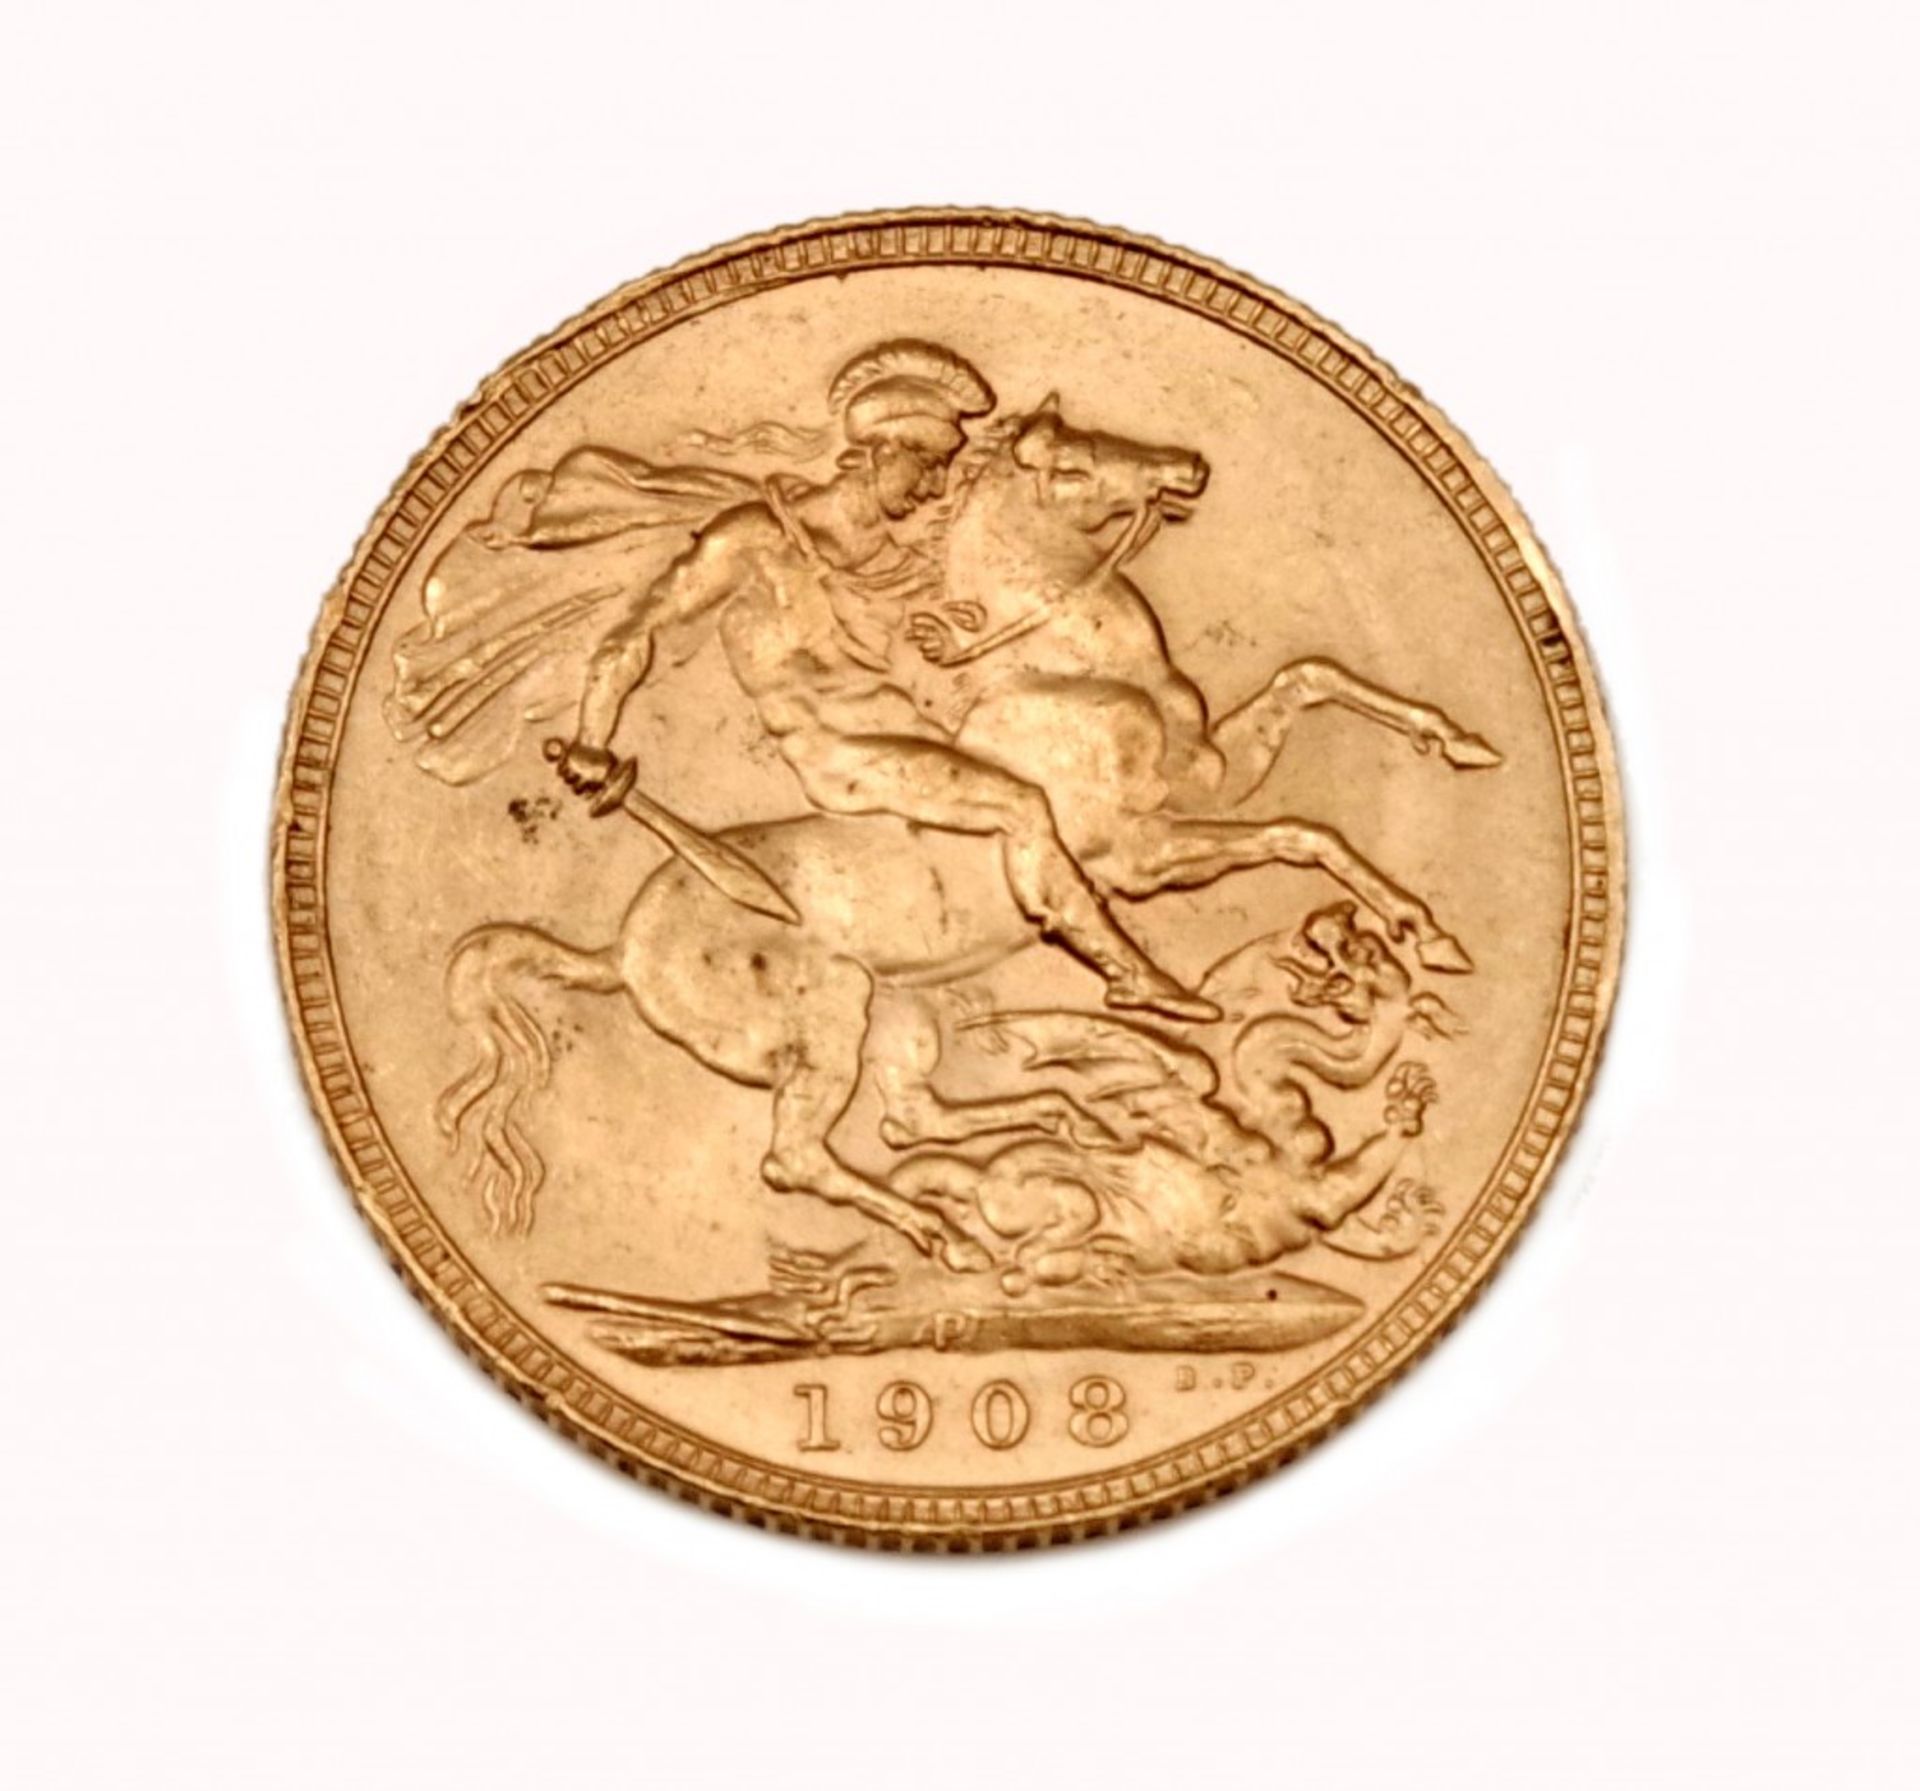 Gold Sovereign - King Edward VII - Perth 1908 - Image 2 of 2